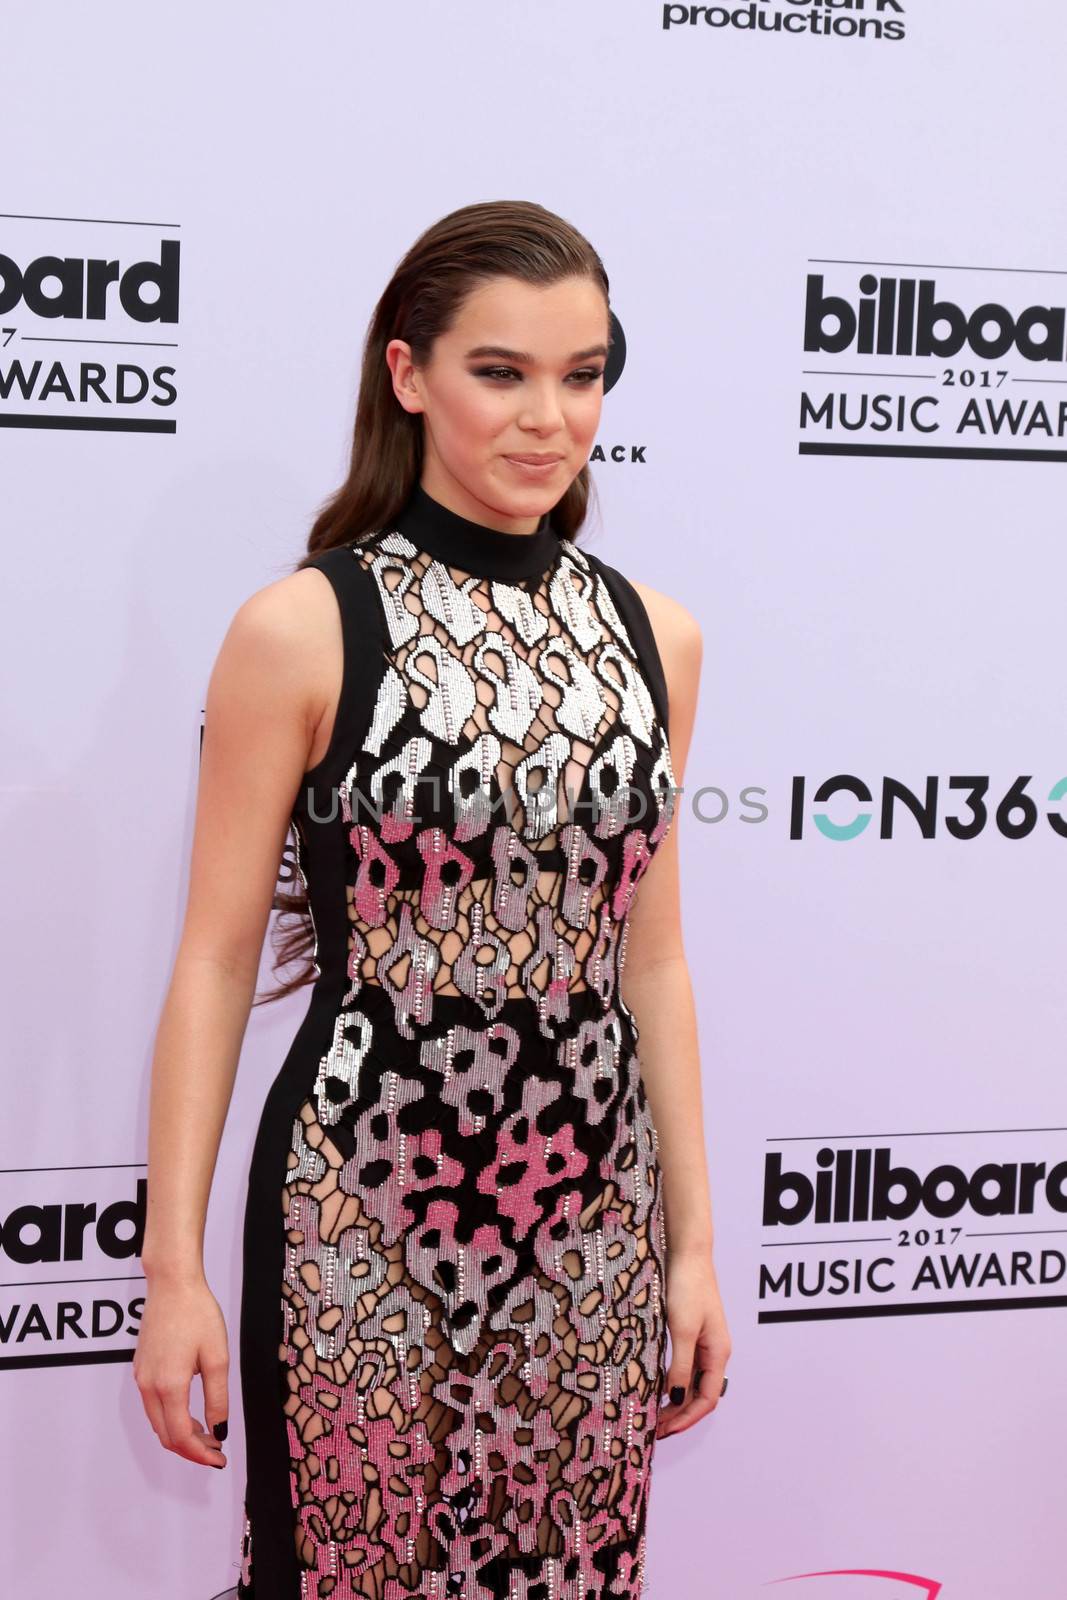 Hailee Steinfeld
at the 2017 Billboard Awards Arrivals, T-Mobile Arena, Las Vegas, NV 05-21-17/ImageCollect by ImageCollect